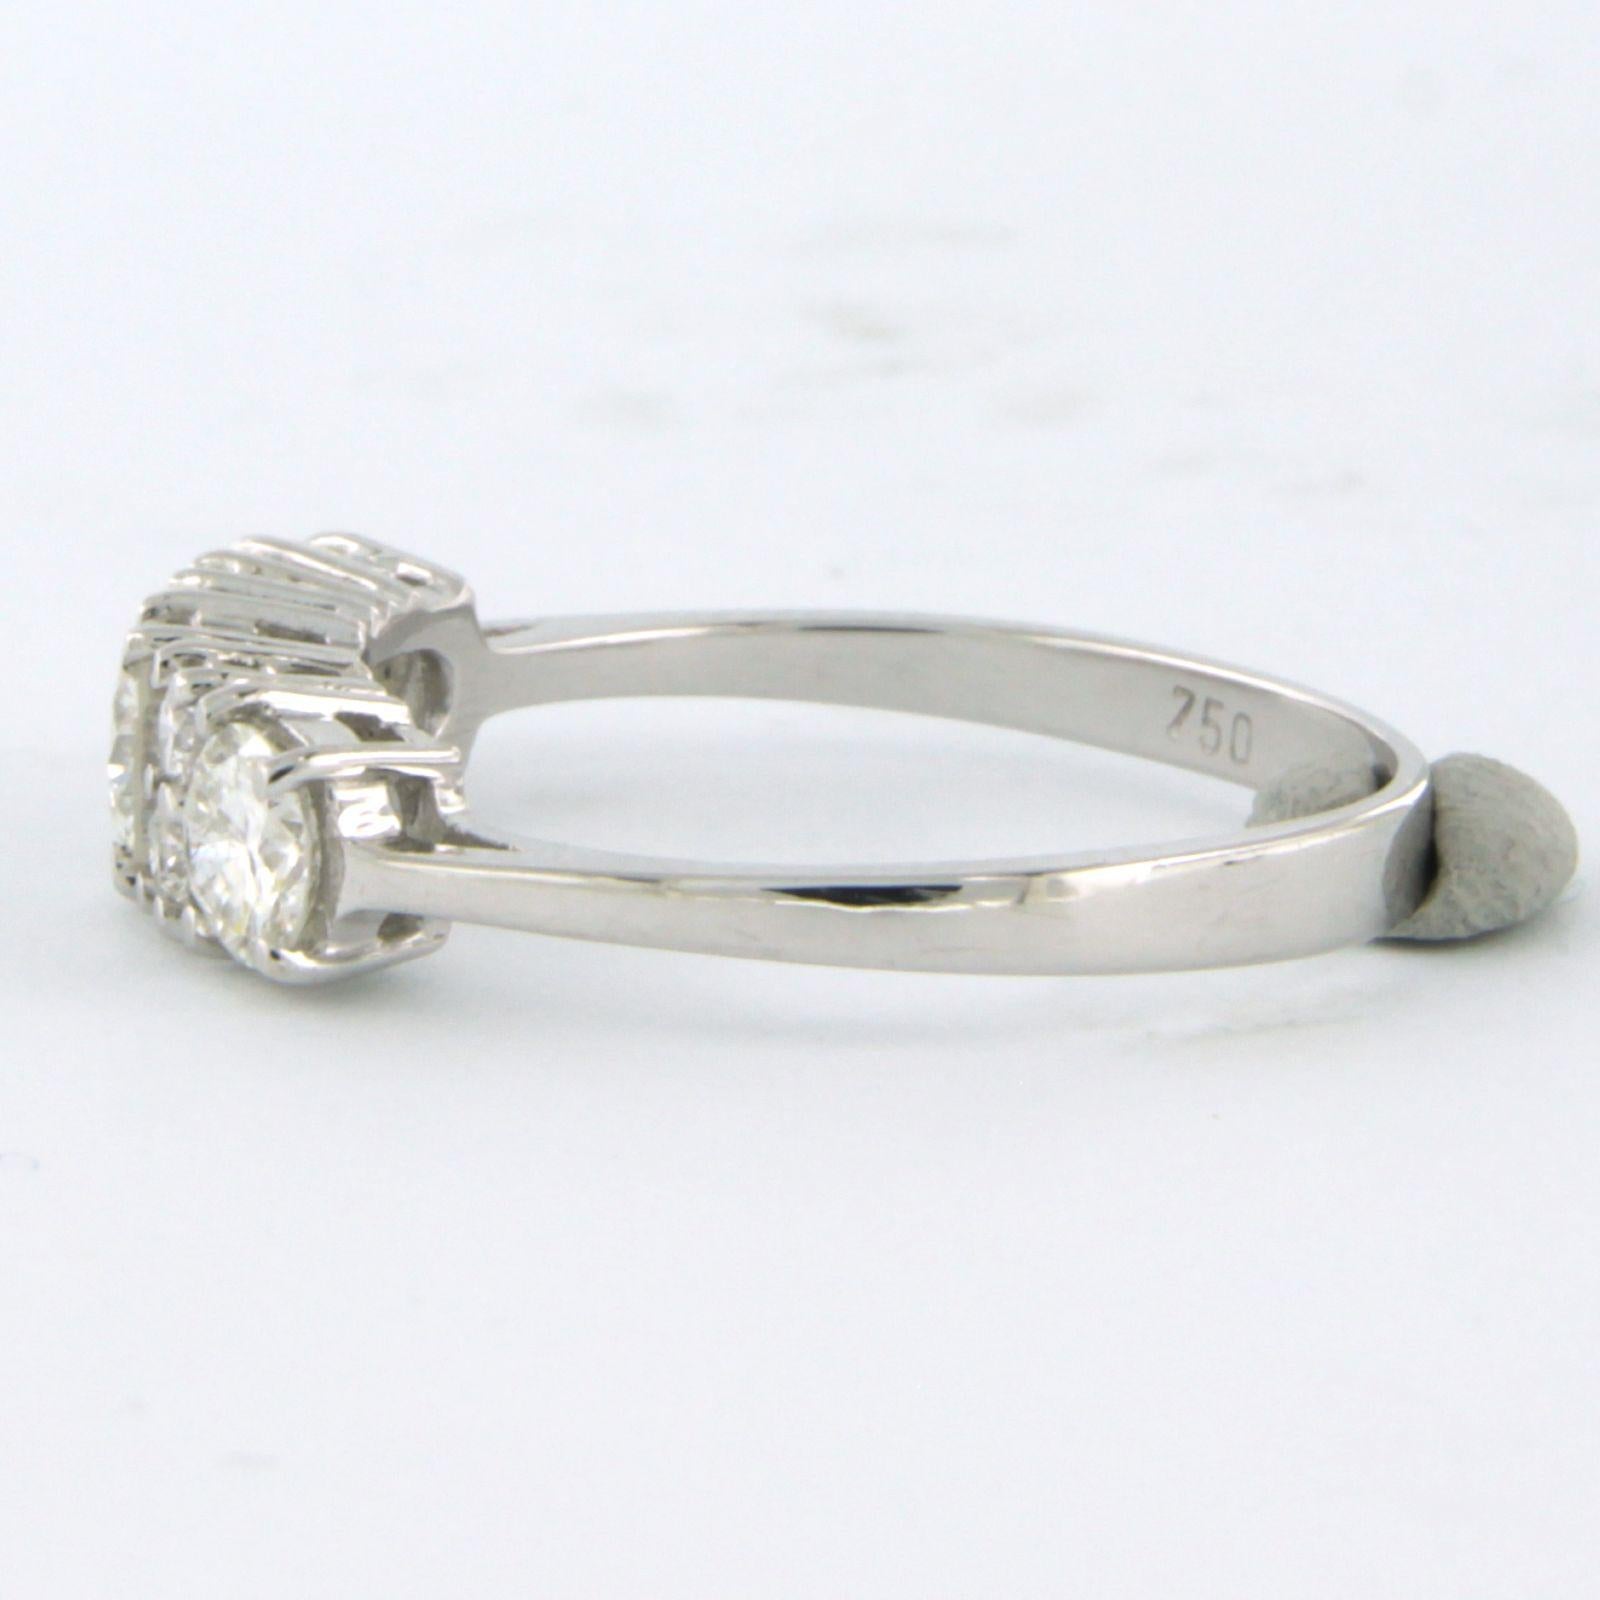 Fashion Ring with diamonds up to 1.00ct. 18k white gold For Sale 1